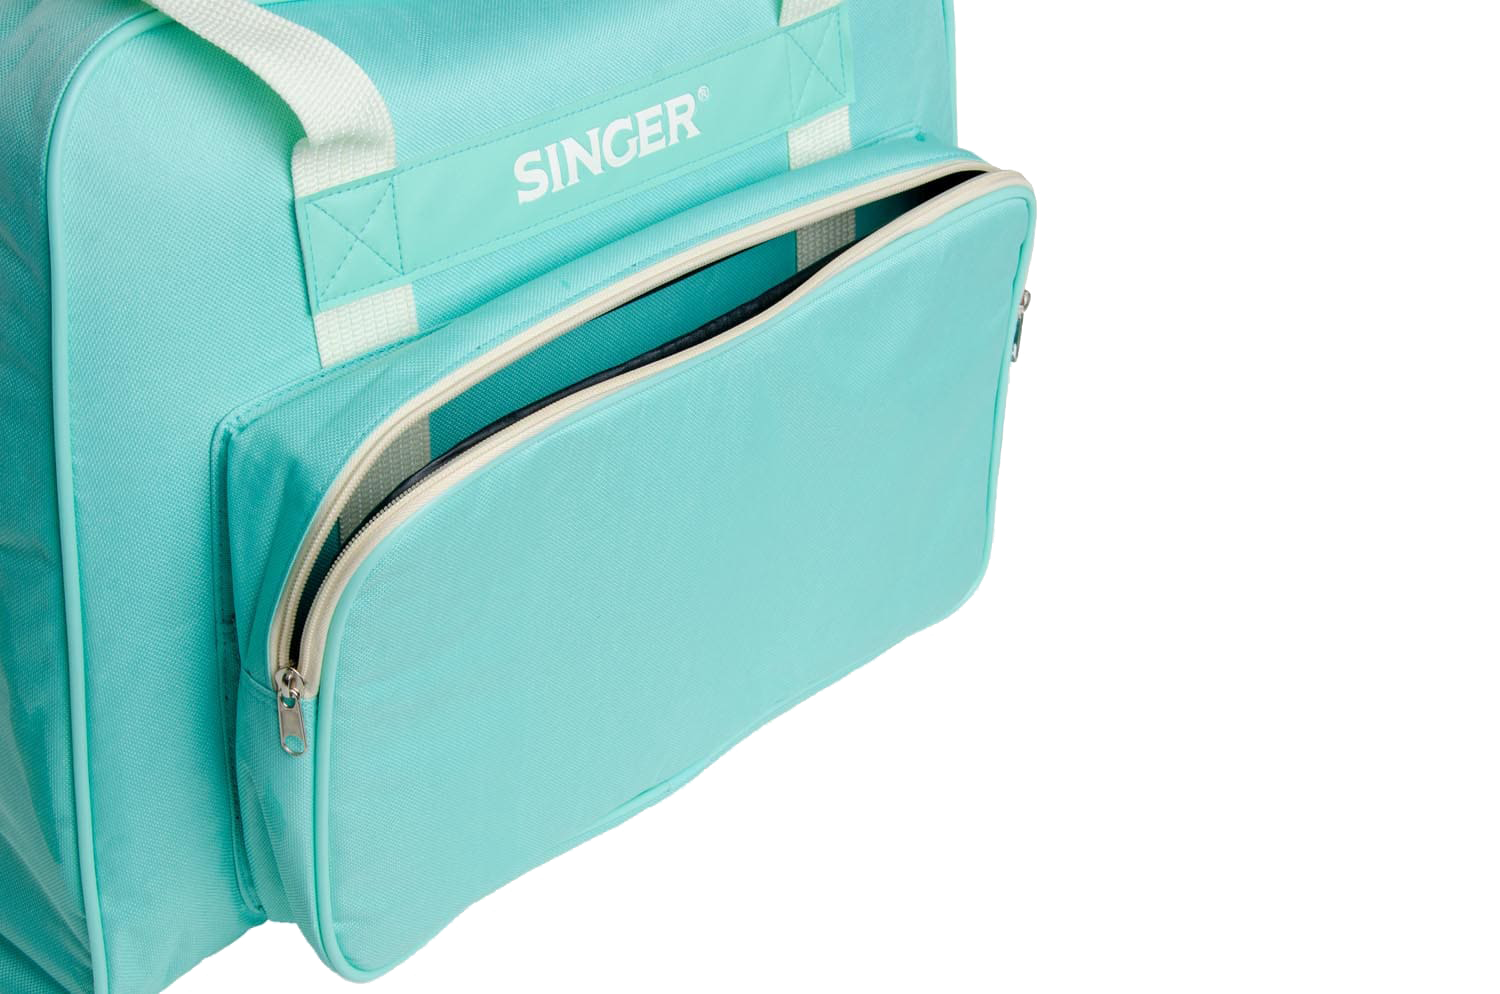 Singer Universal Canvas Sewing Machine Carrying Tote Bag